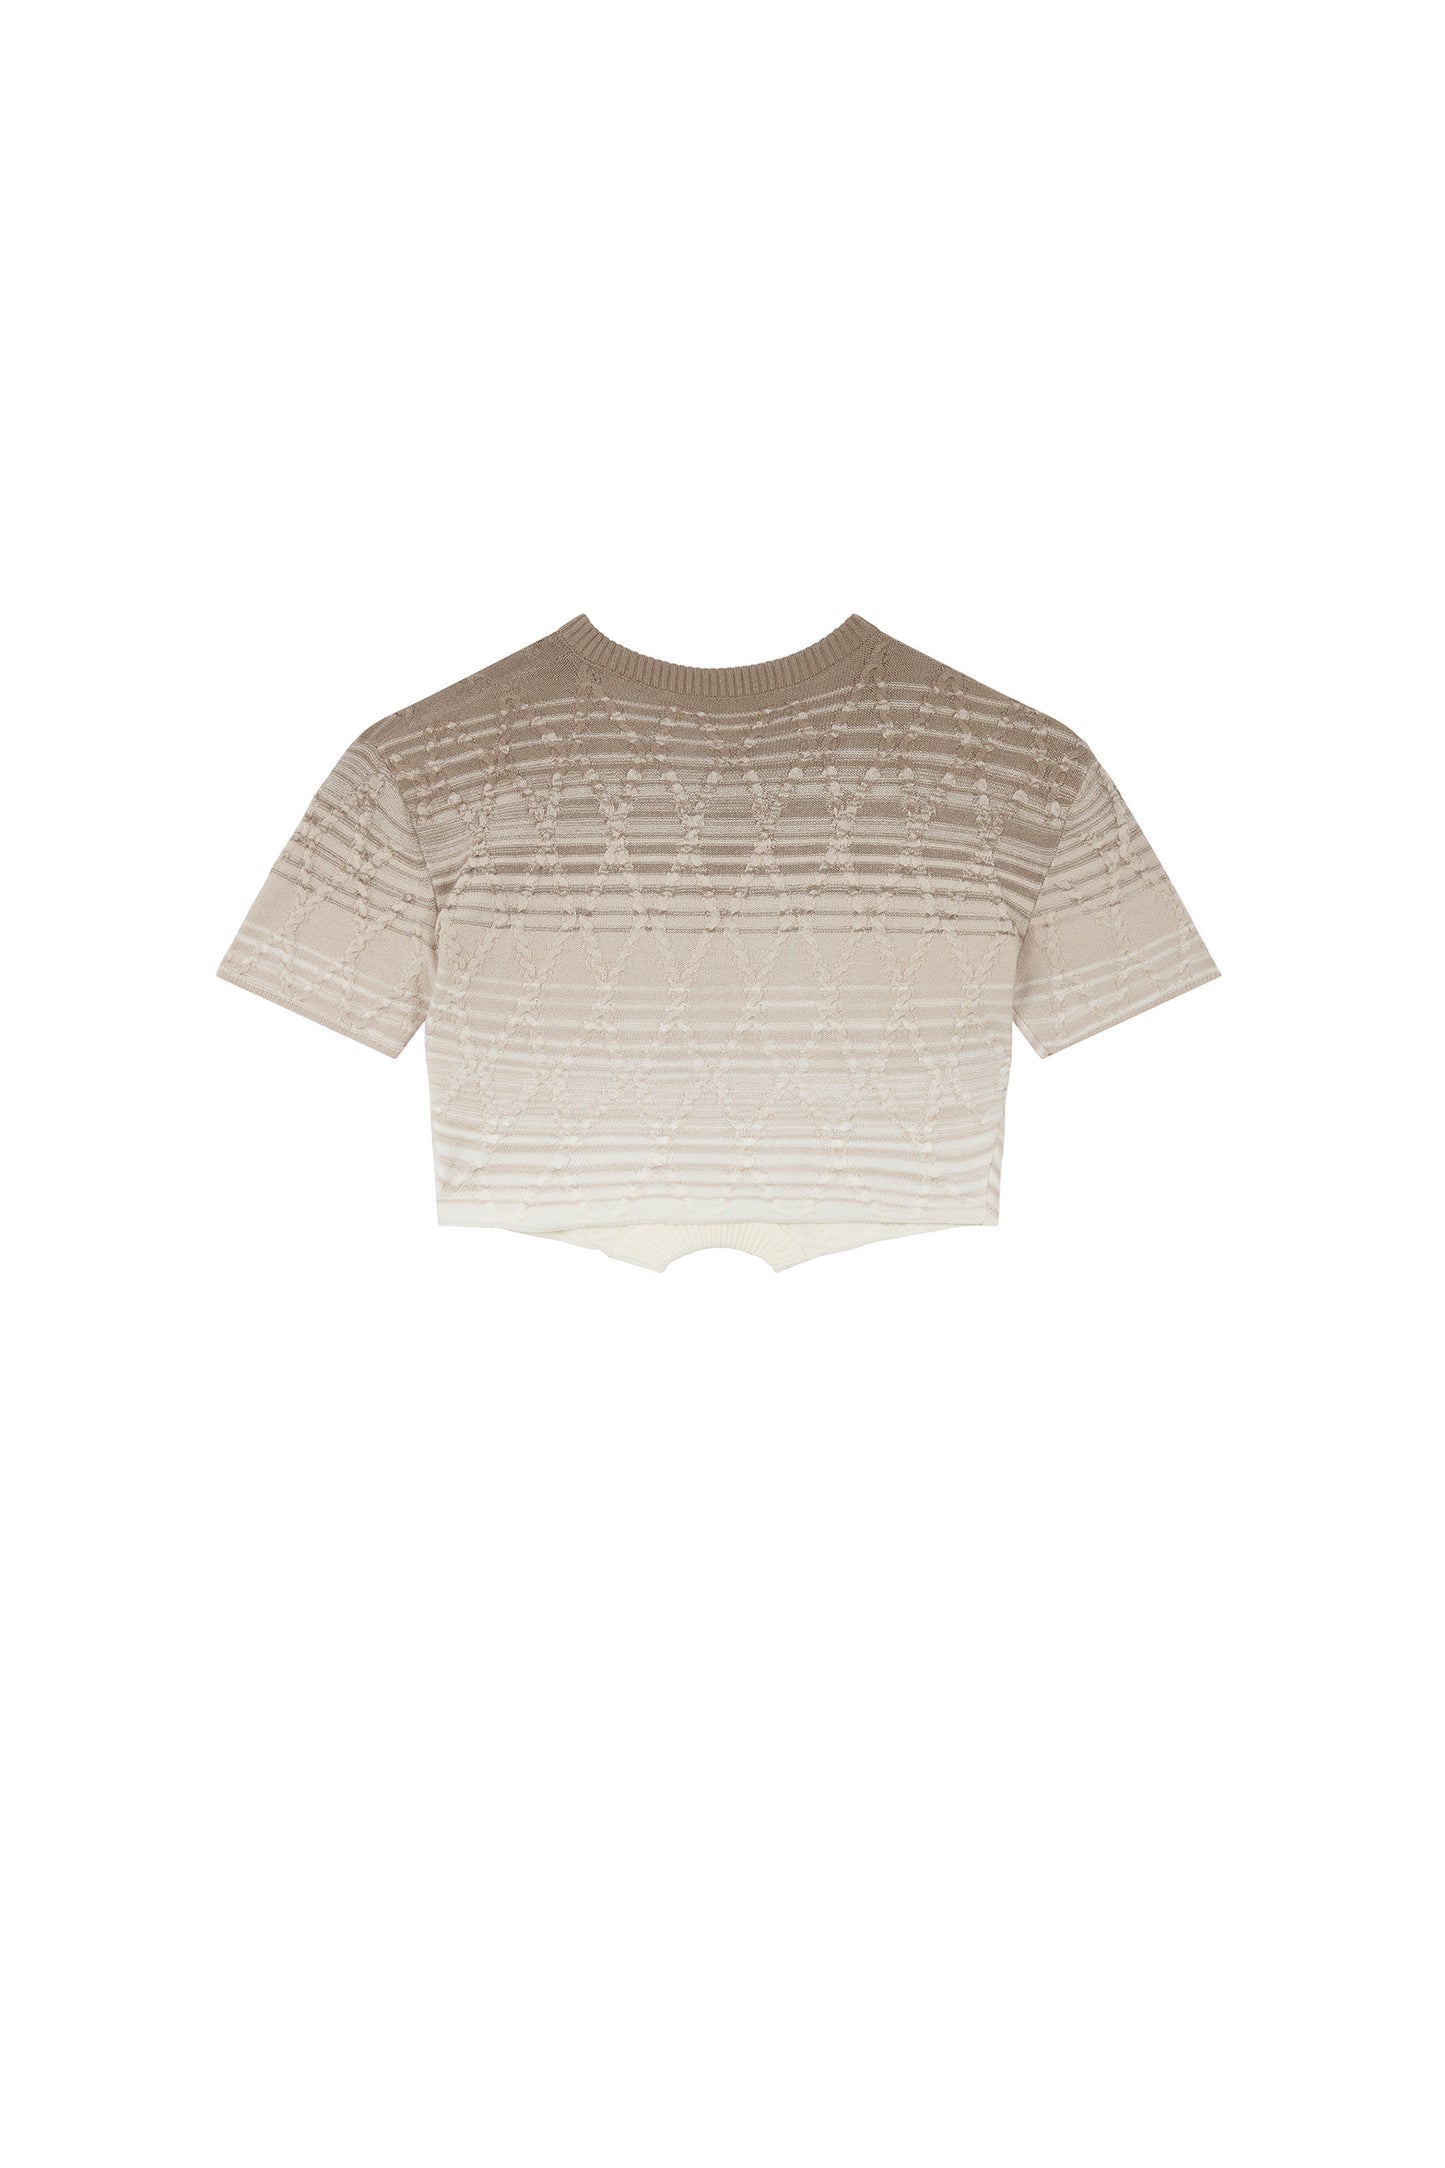 OVERTURNED TEE OFF WHITE-CLAY